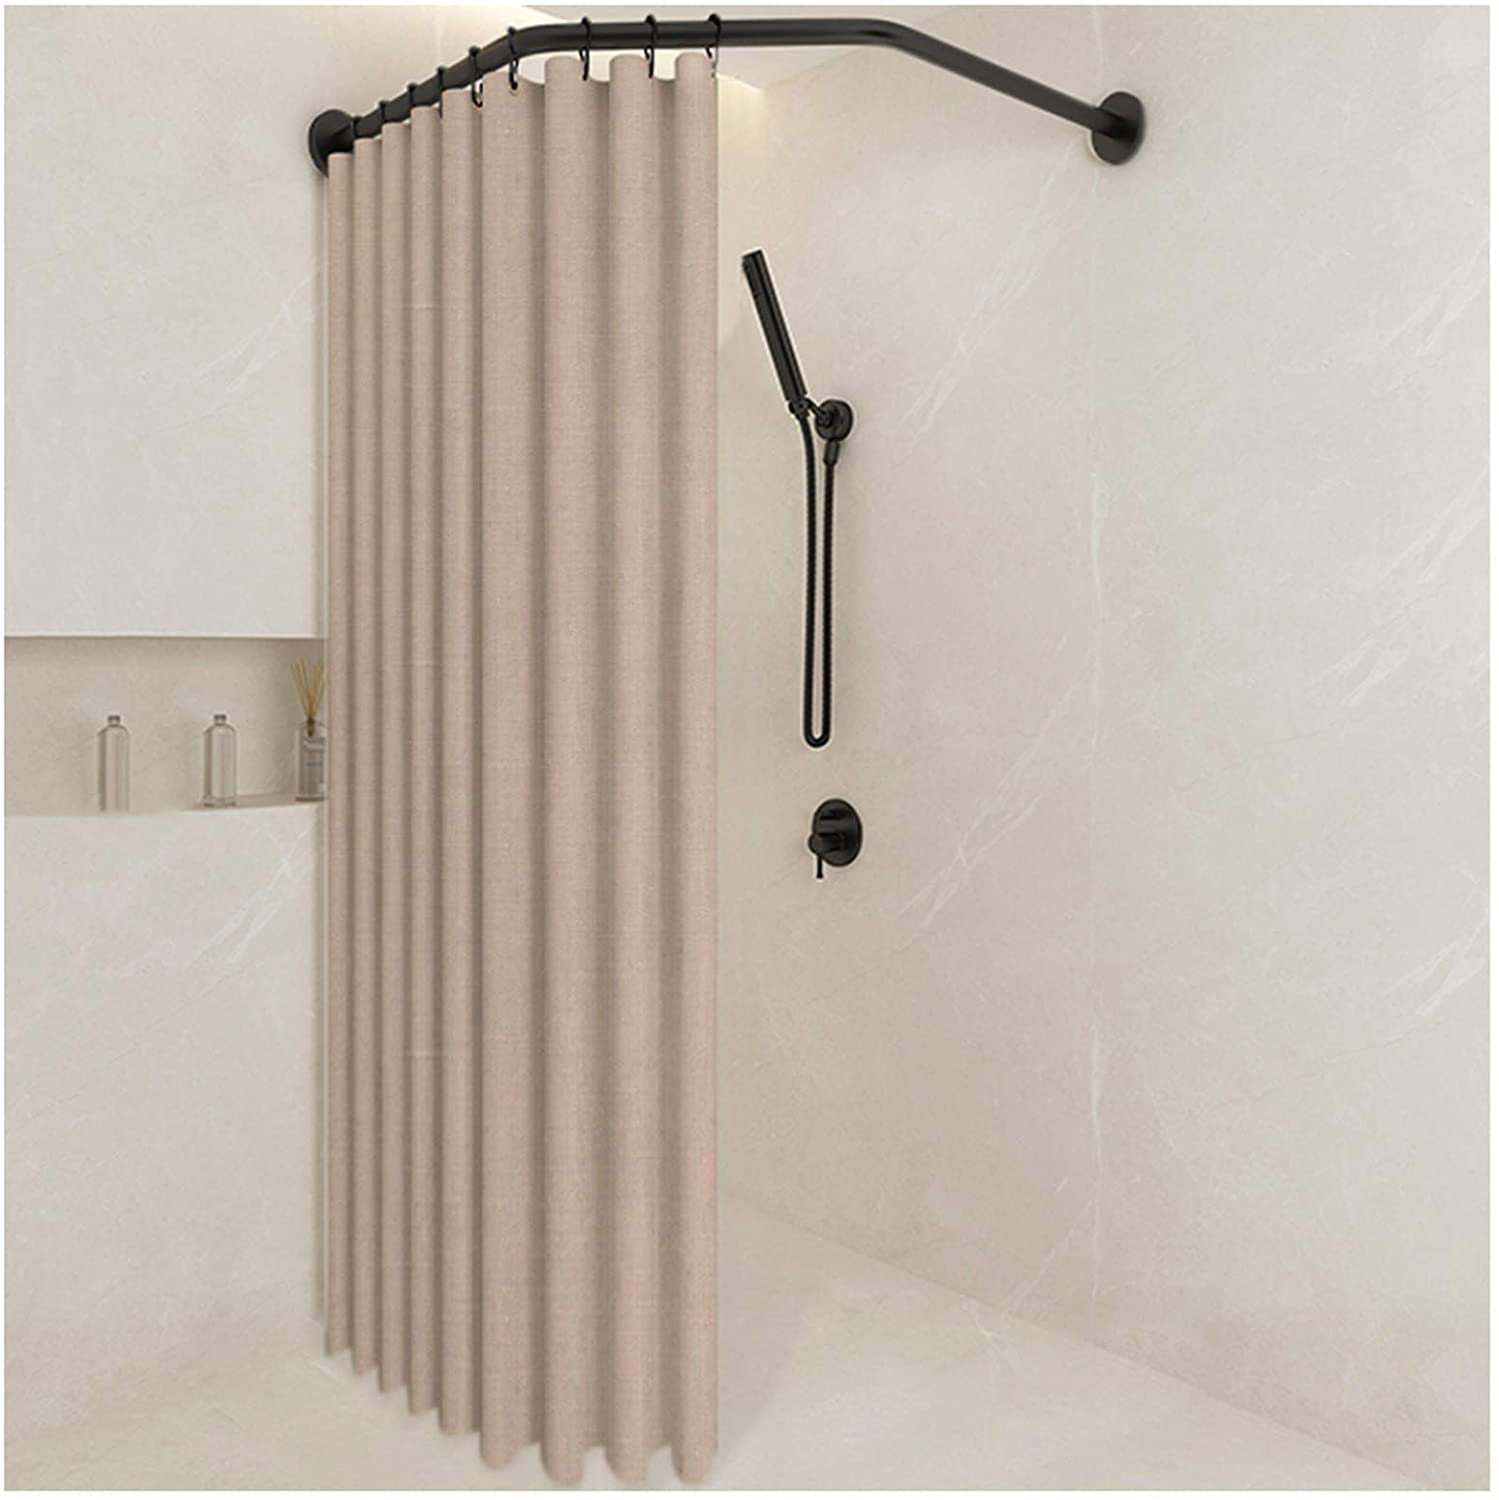 90cm -160cm Extendable Shower Curtain Rail For Bathroom Kitchen & Wardrobe Stainless Steel Shower Poles Extendable No Drill Needed Curtain Rod With 12PCS Shower Curtain Hooks FREE 